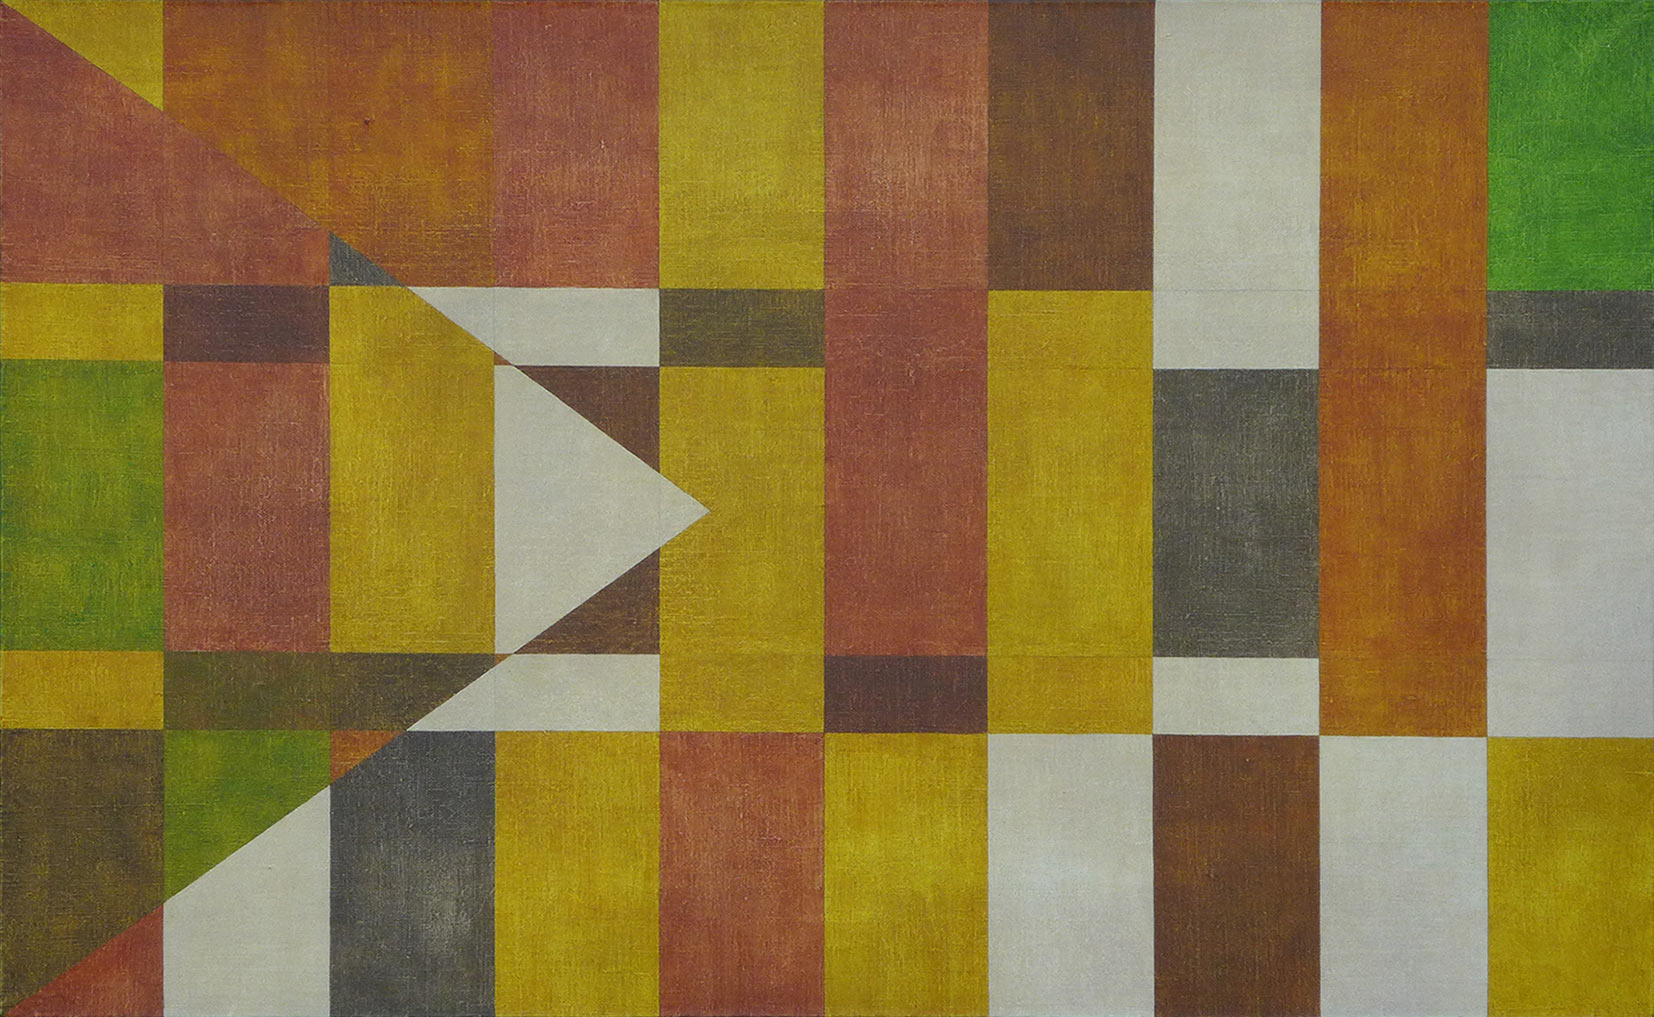 A painting in honor of Mozambique and the marrabenta, a typical music of the country. Drawn after the country's flag, the horizontal lines are extended in the left triangle to give the idea of a musical score. It is cut vertically in 10 for the 10 provinces of the country (without the capital). The colors used are those of the flag, red, black, yellow, green, all mixed with the ochre (laterite) of the central alley of the Garden of Memory, in memory of slavery, in Ilha de Mozambique. They are arranged rhythmically, every 3, 5, 8 and 13 squares. The squares that do not receive colors are painted with an off-white of earth, the 5th color of the flag.